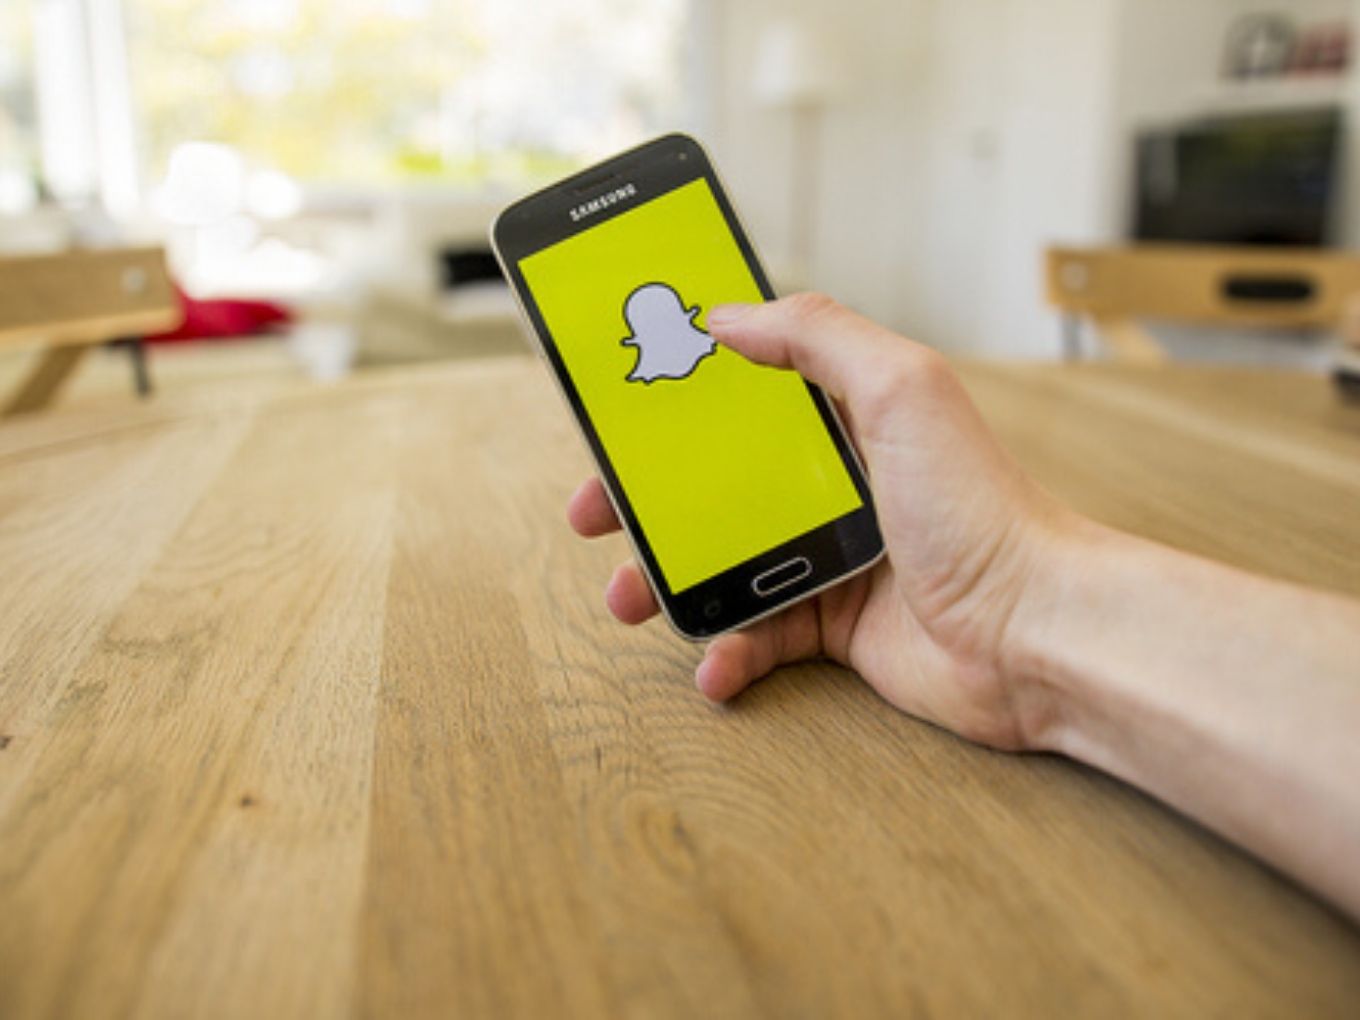 With Burgeoning Demand, Snapchat’s CEO Bets Big on India